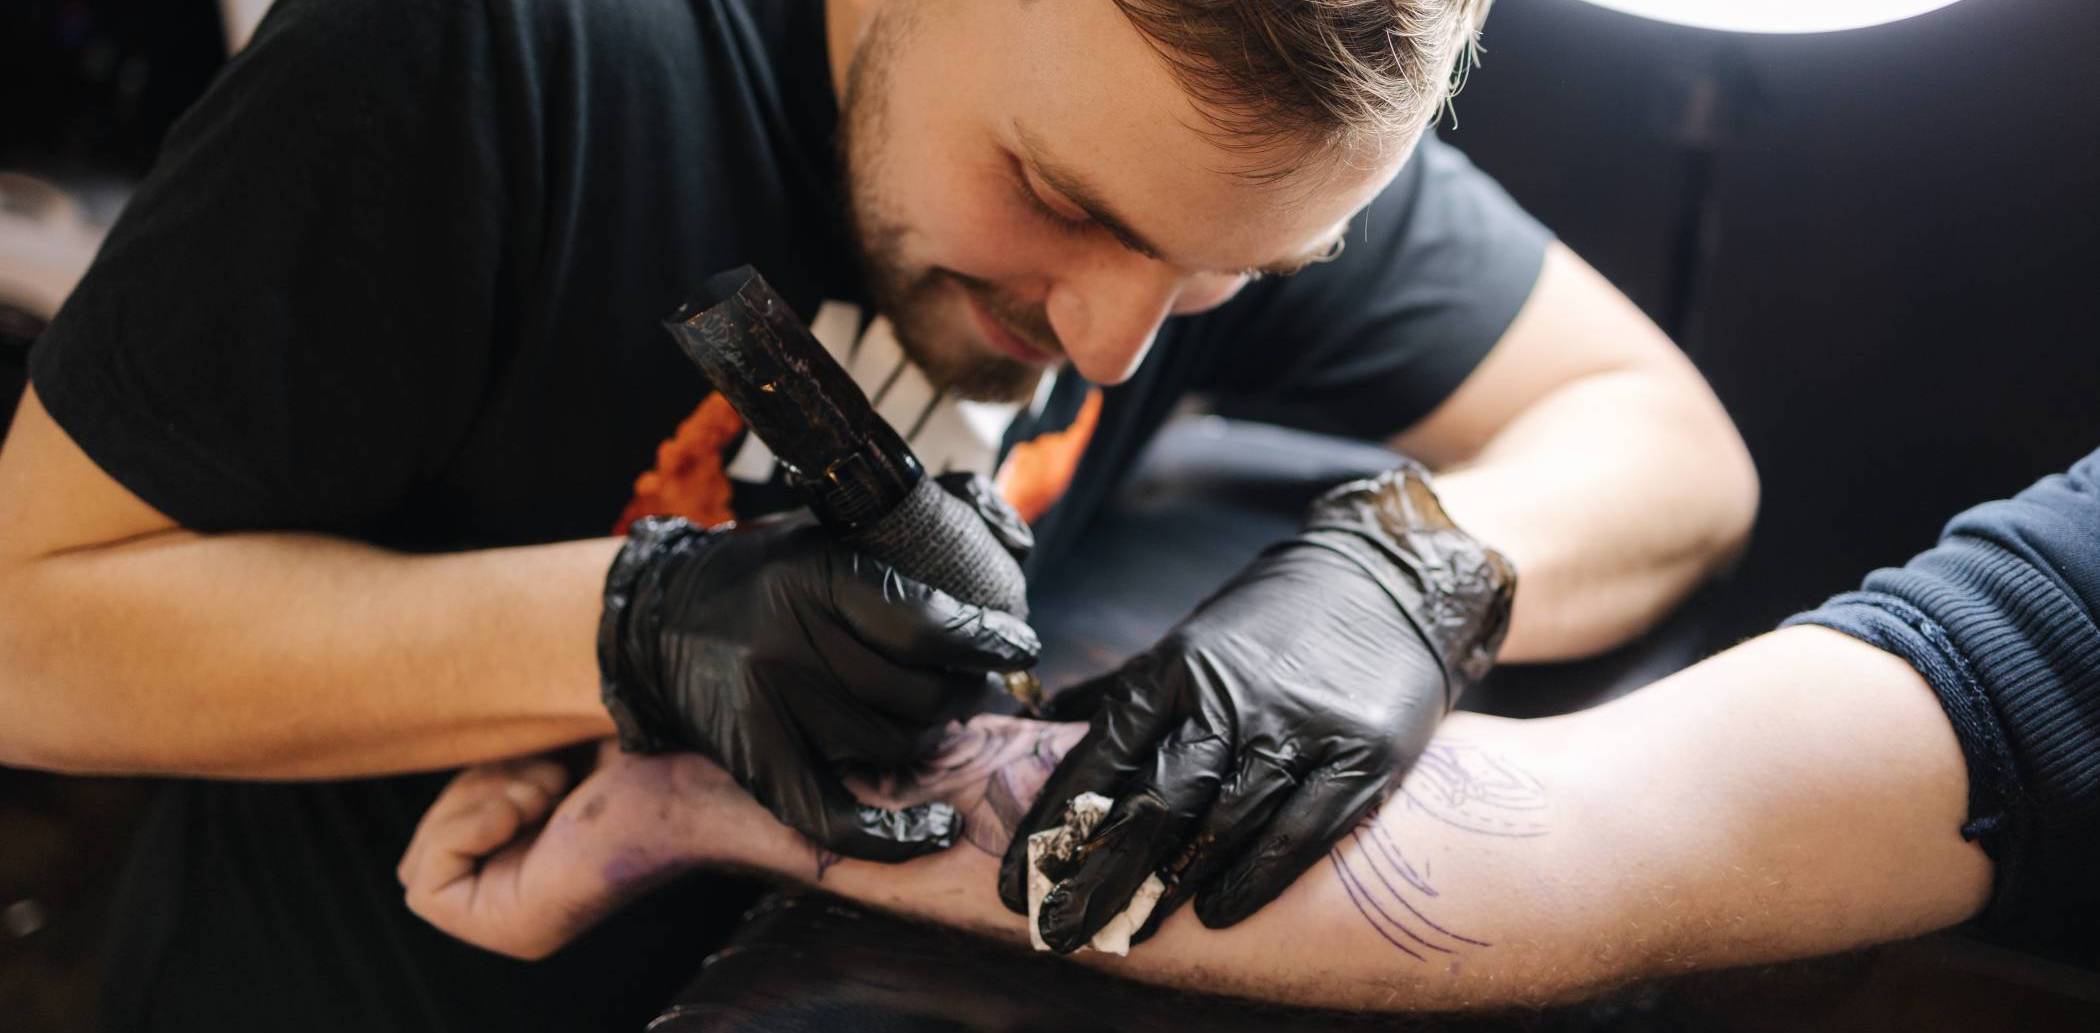 Gallery - Canberra Ink